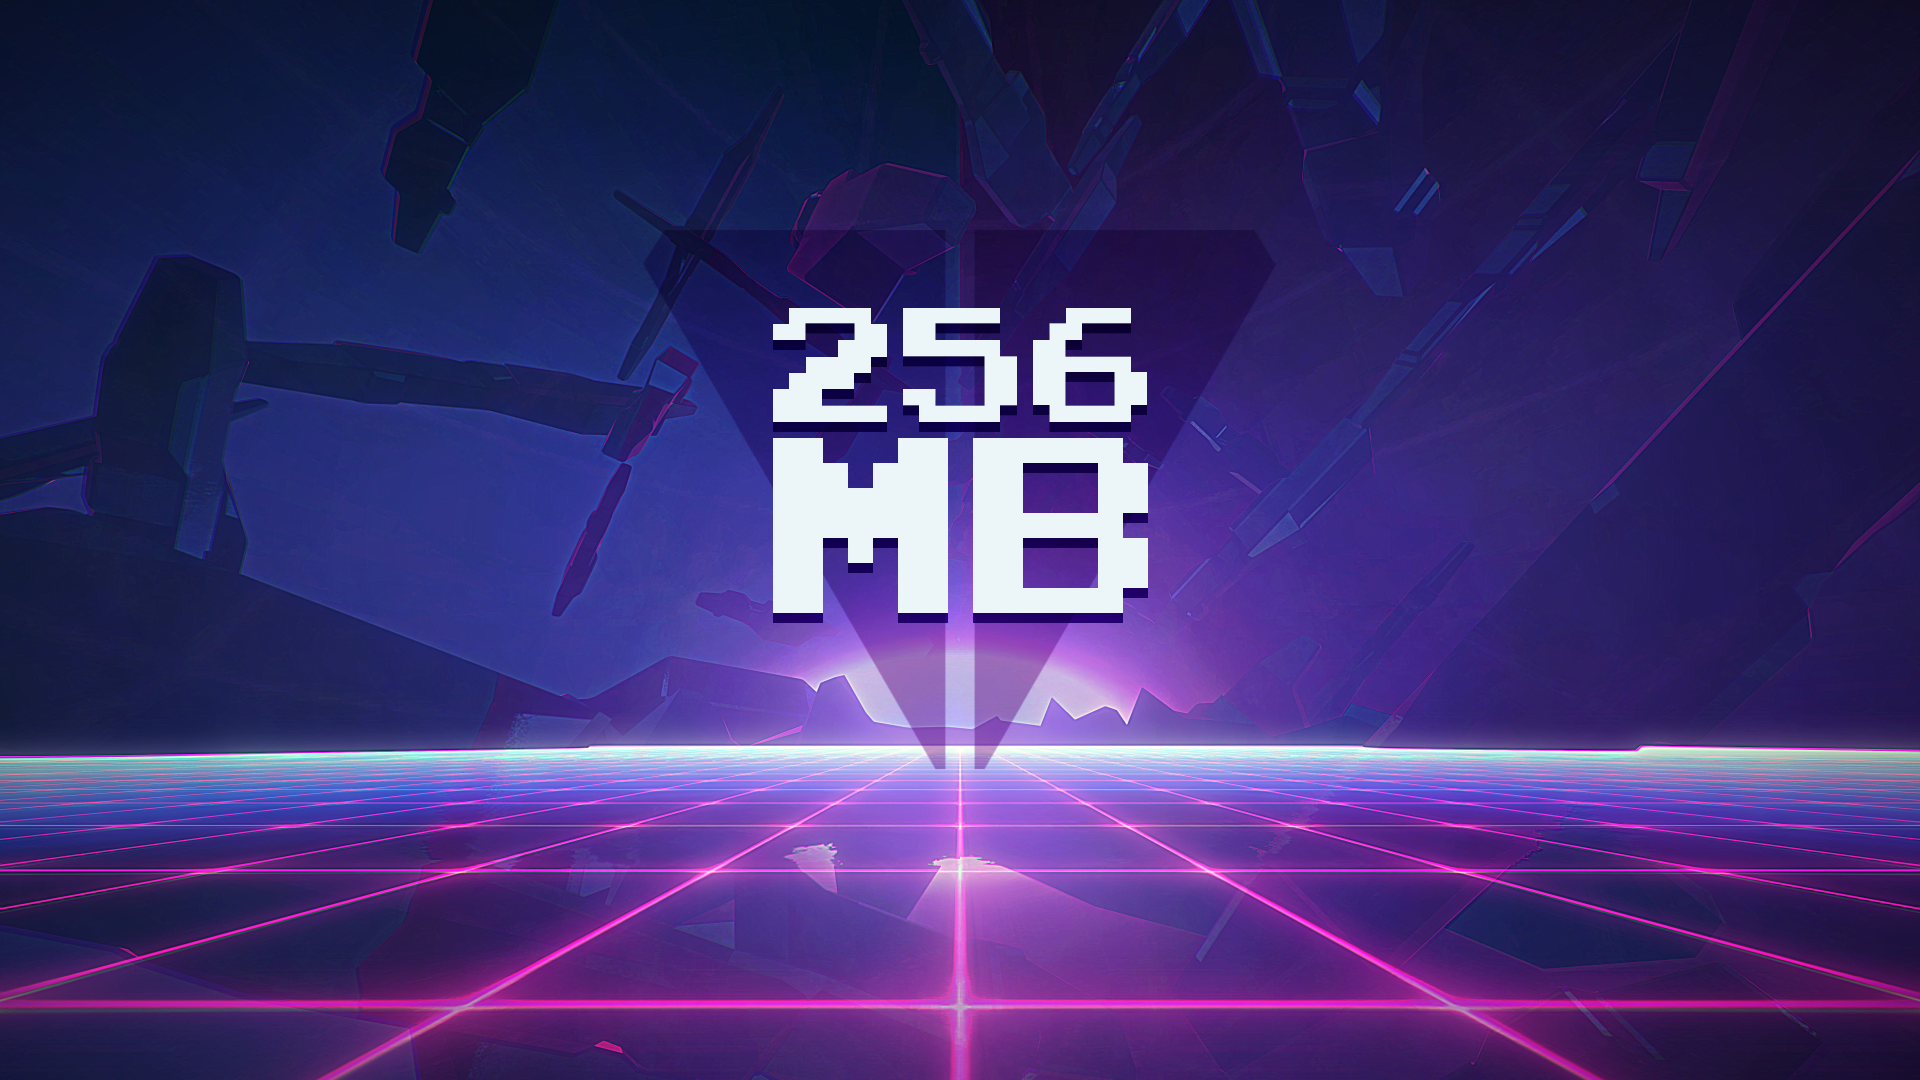 Icon for 256 MB